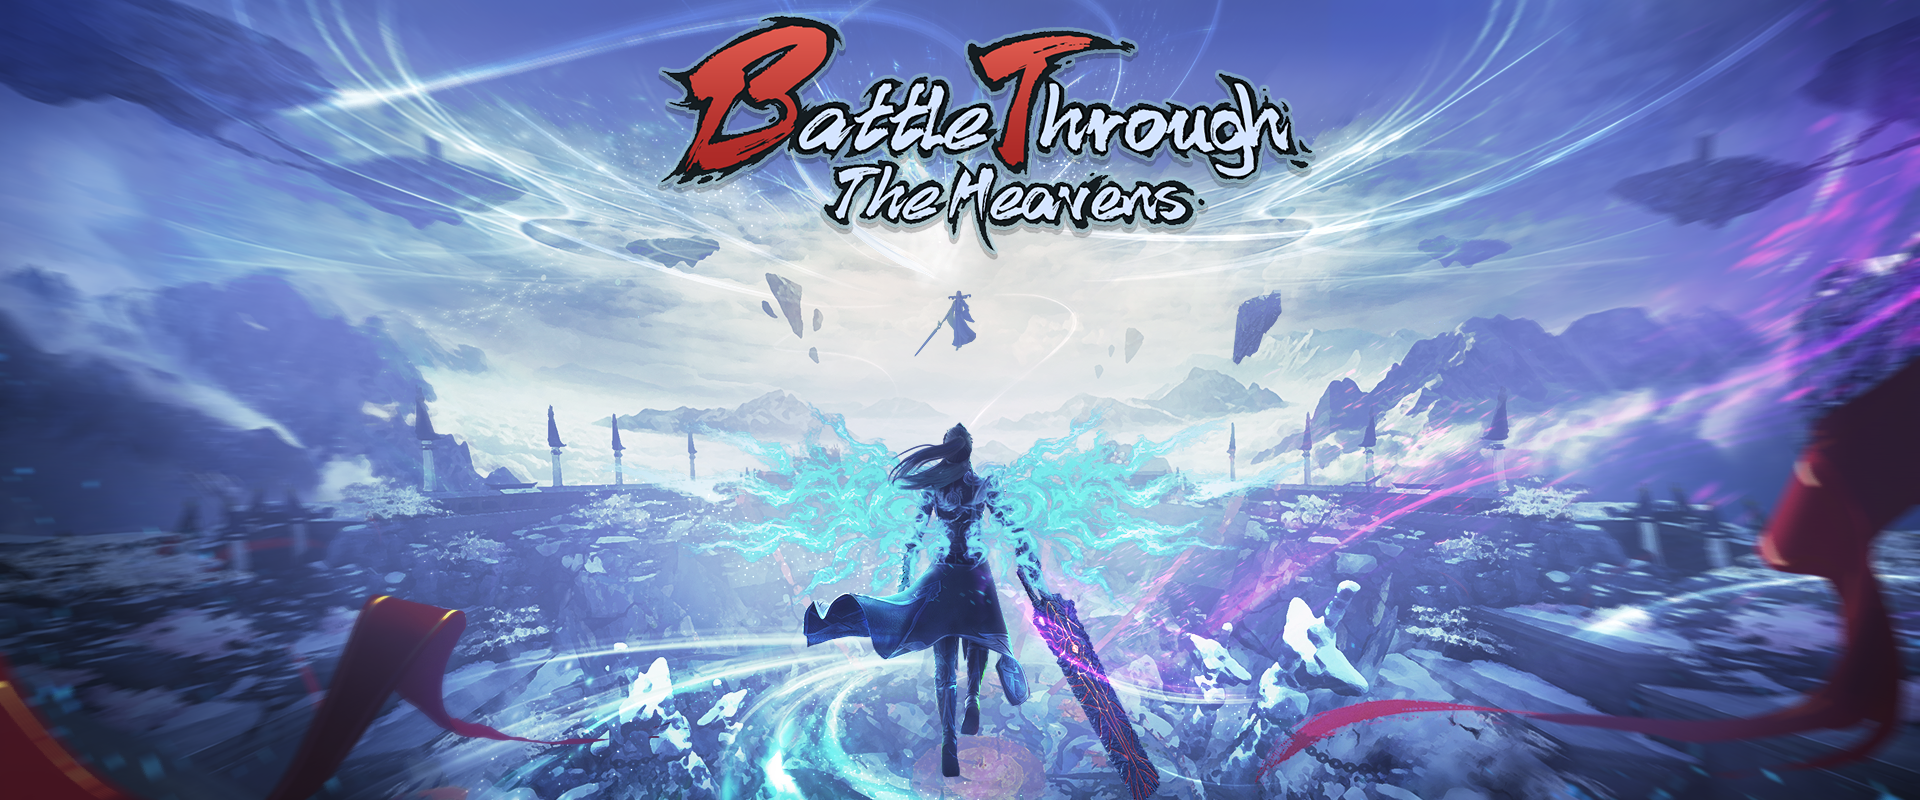 Download & Play Battle Through the Heavens on PC & Mac with NoxPlayer (Emulator)